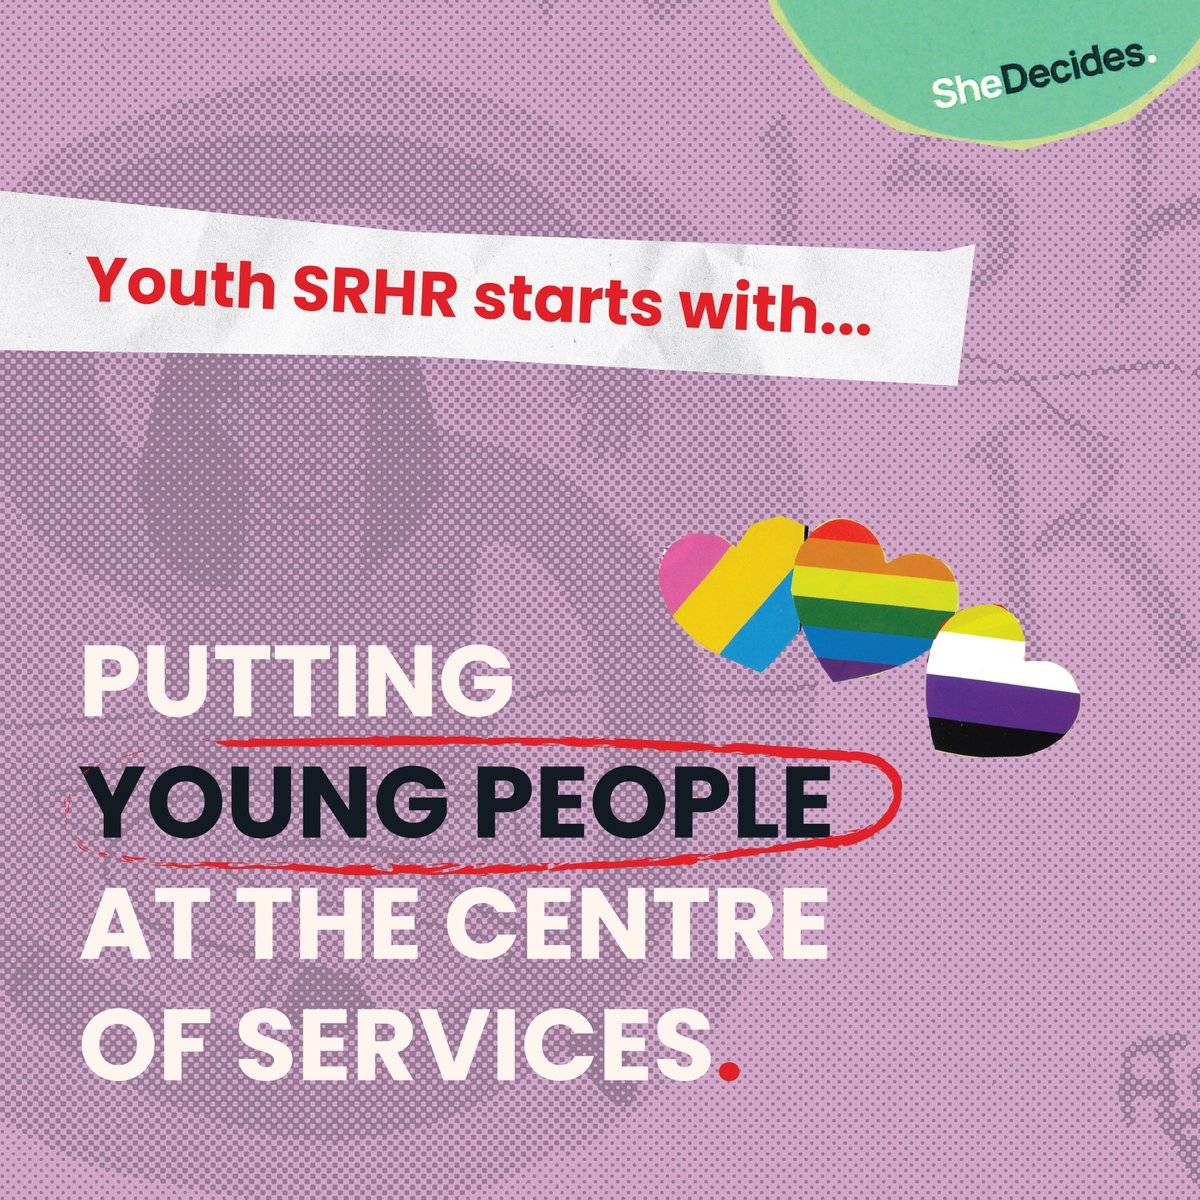 #YouthSRHRStartsWith putting #youngpeople at the center of services. Young people must be meaningfully engaged in SRHR service provision, so that support is inclusive and youth-friendly. Explore our zine, where we amplify YOUR voice on youth SRHR🗣️shedecides.com/youthsrhr